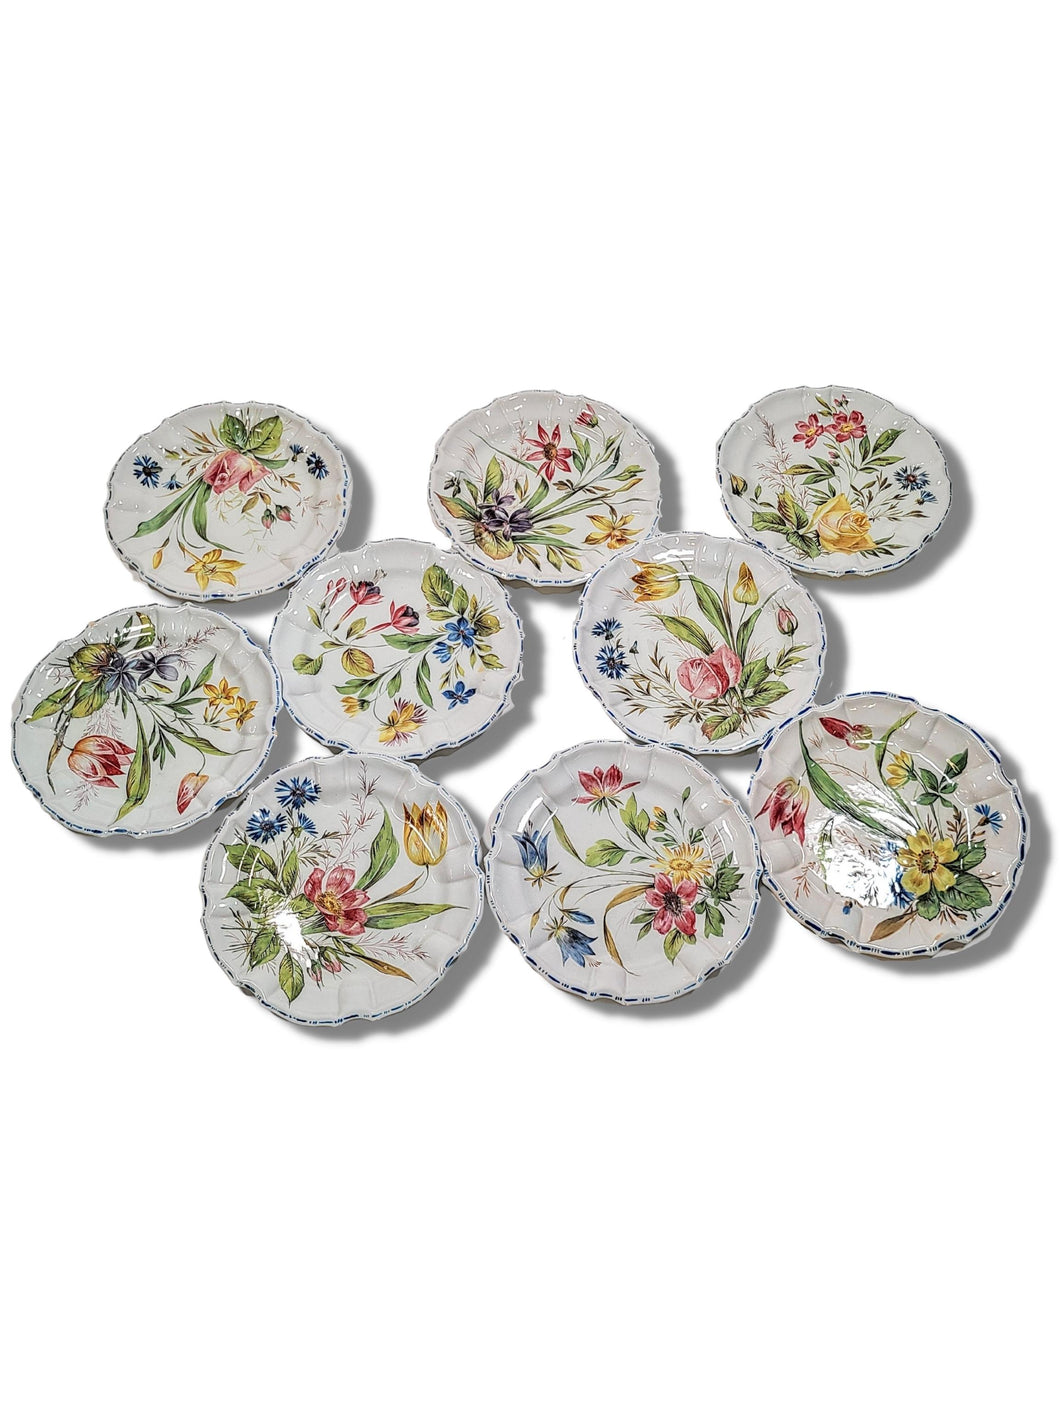 Italian Plates with Colorful Flower Decoration (Set)